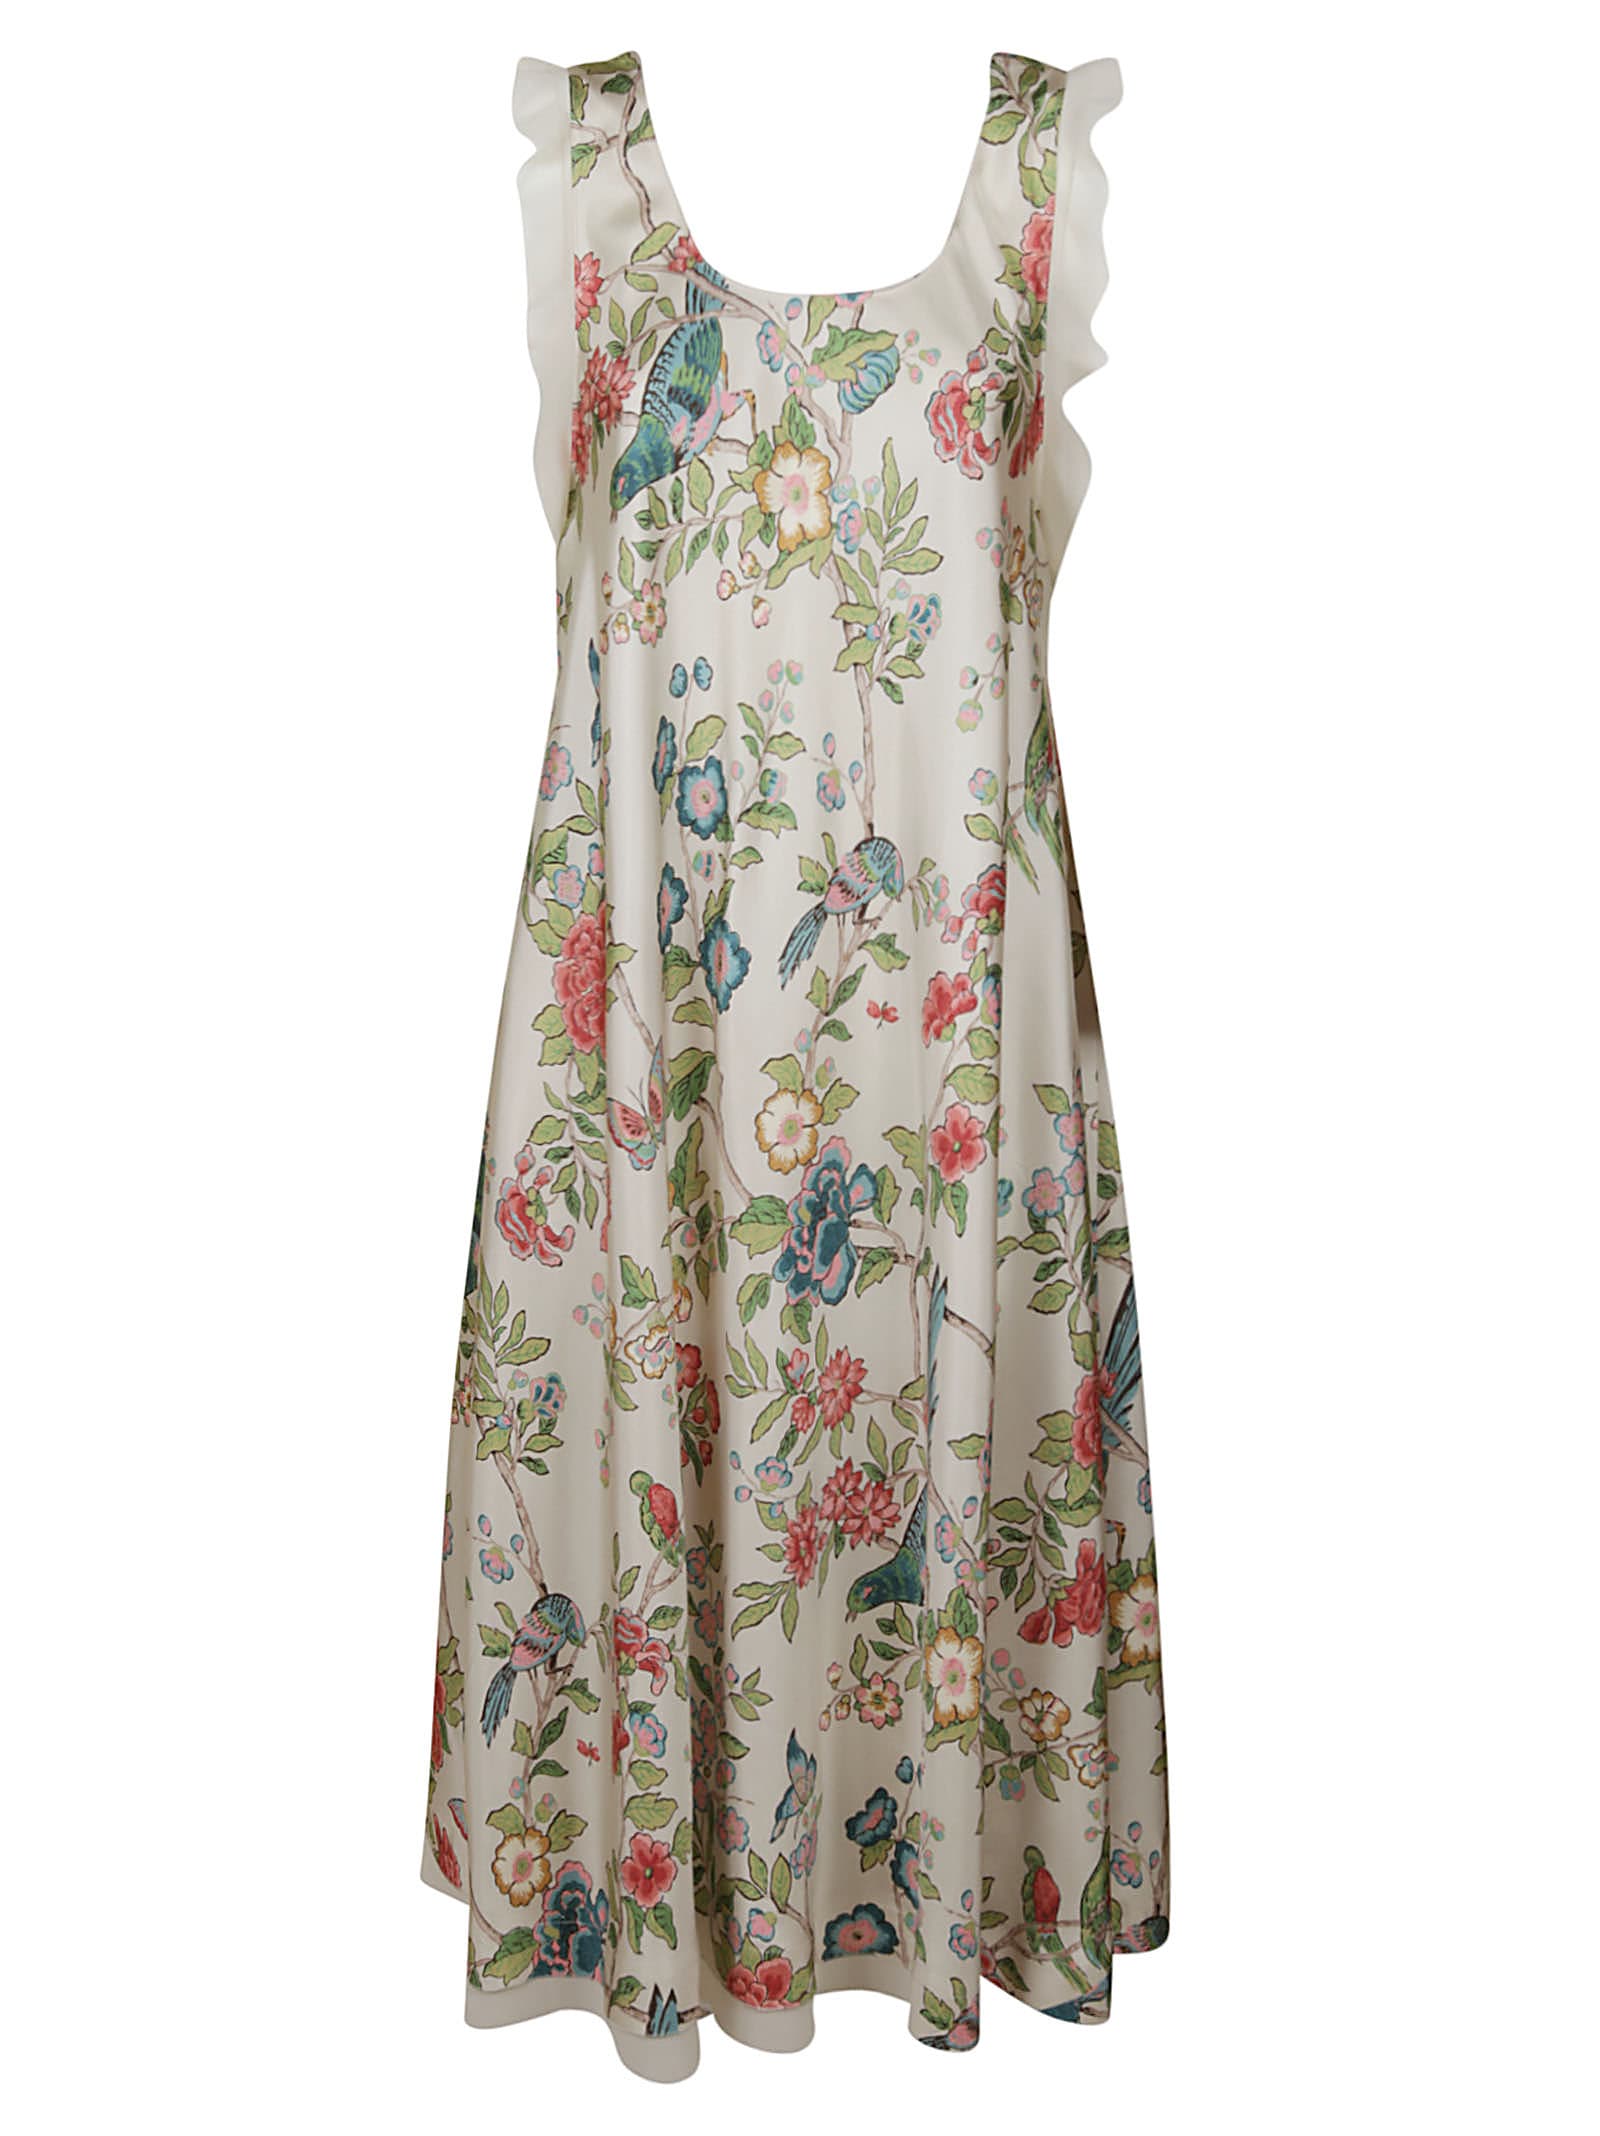 RED Valentino Cut-out Detail Sleeveless Floral Print Dress